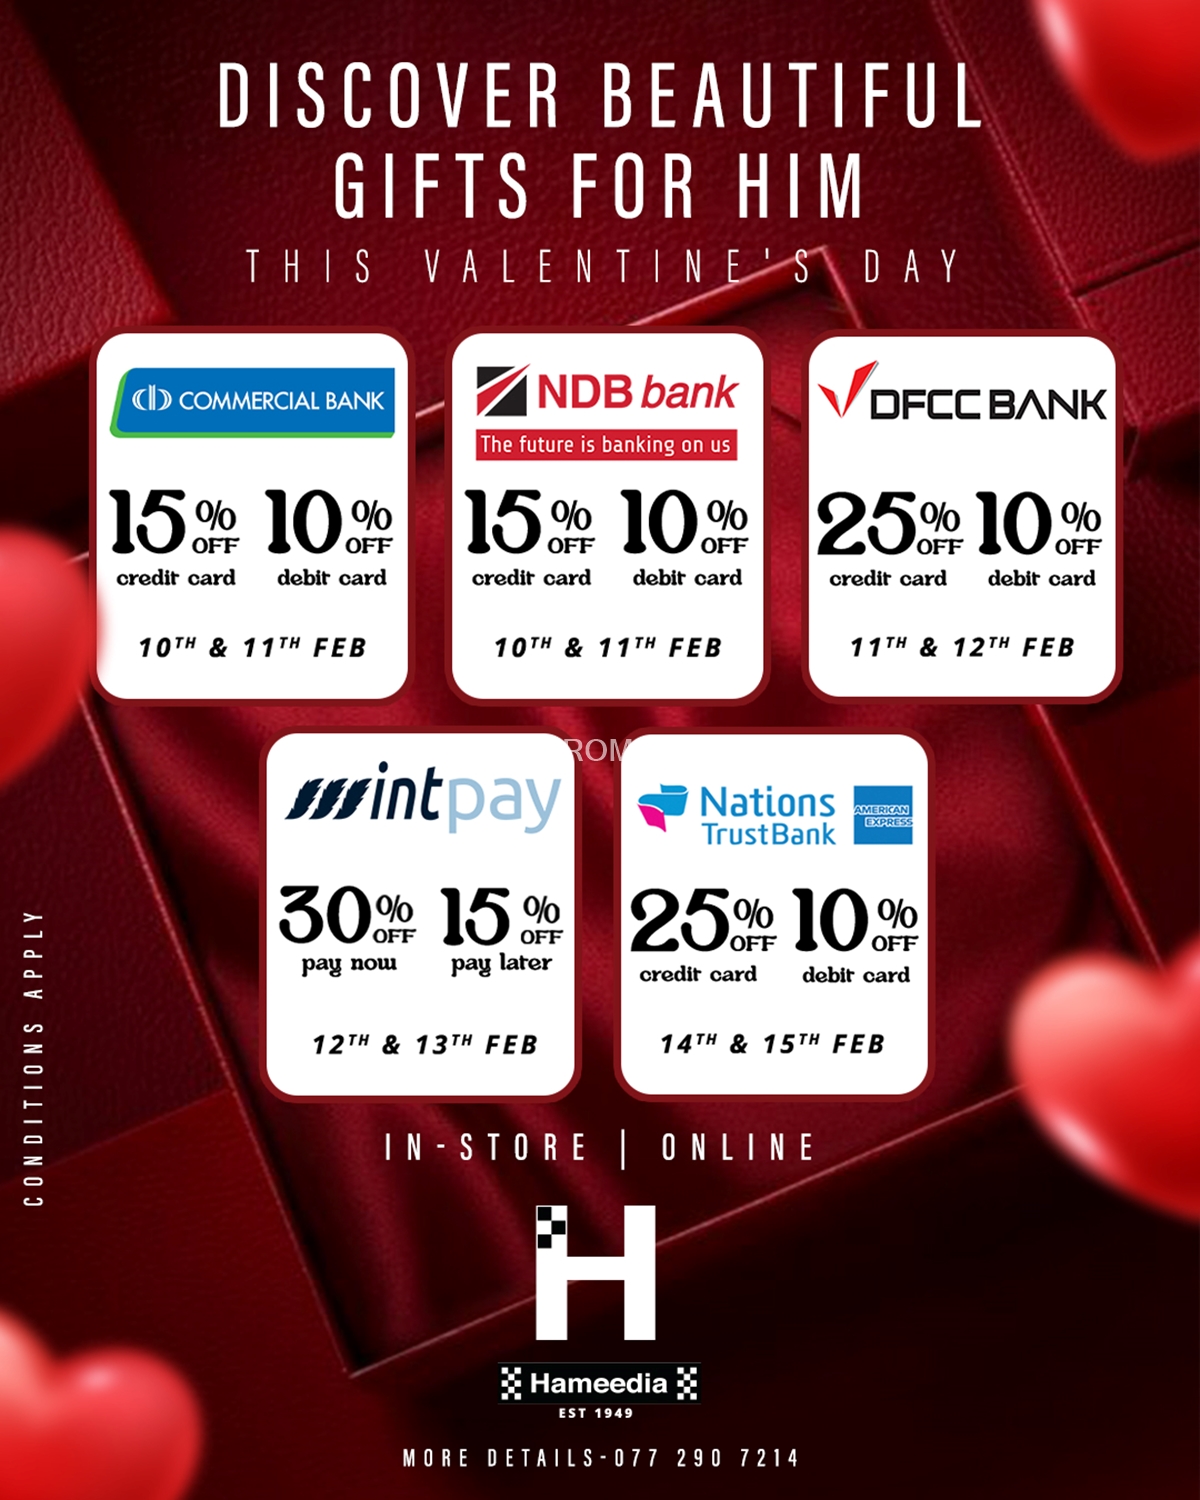 Discover beautiful gifts for him this valentine's day at Hameedia